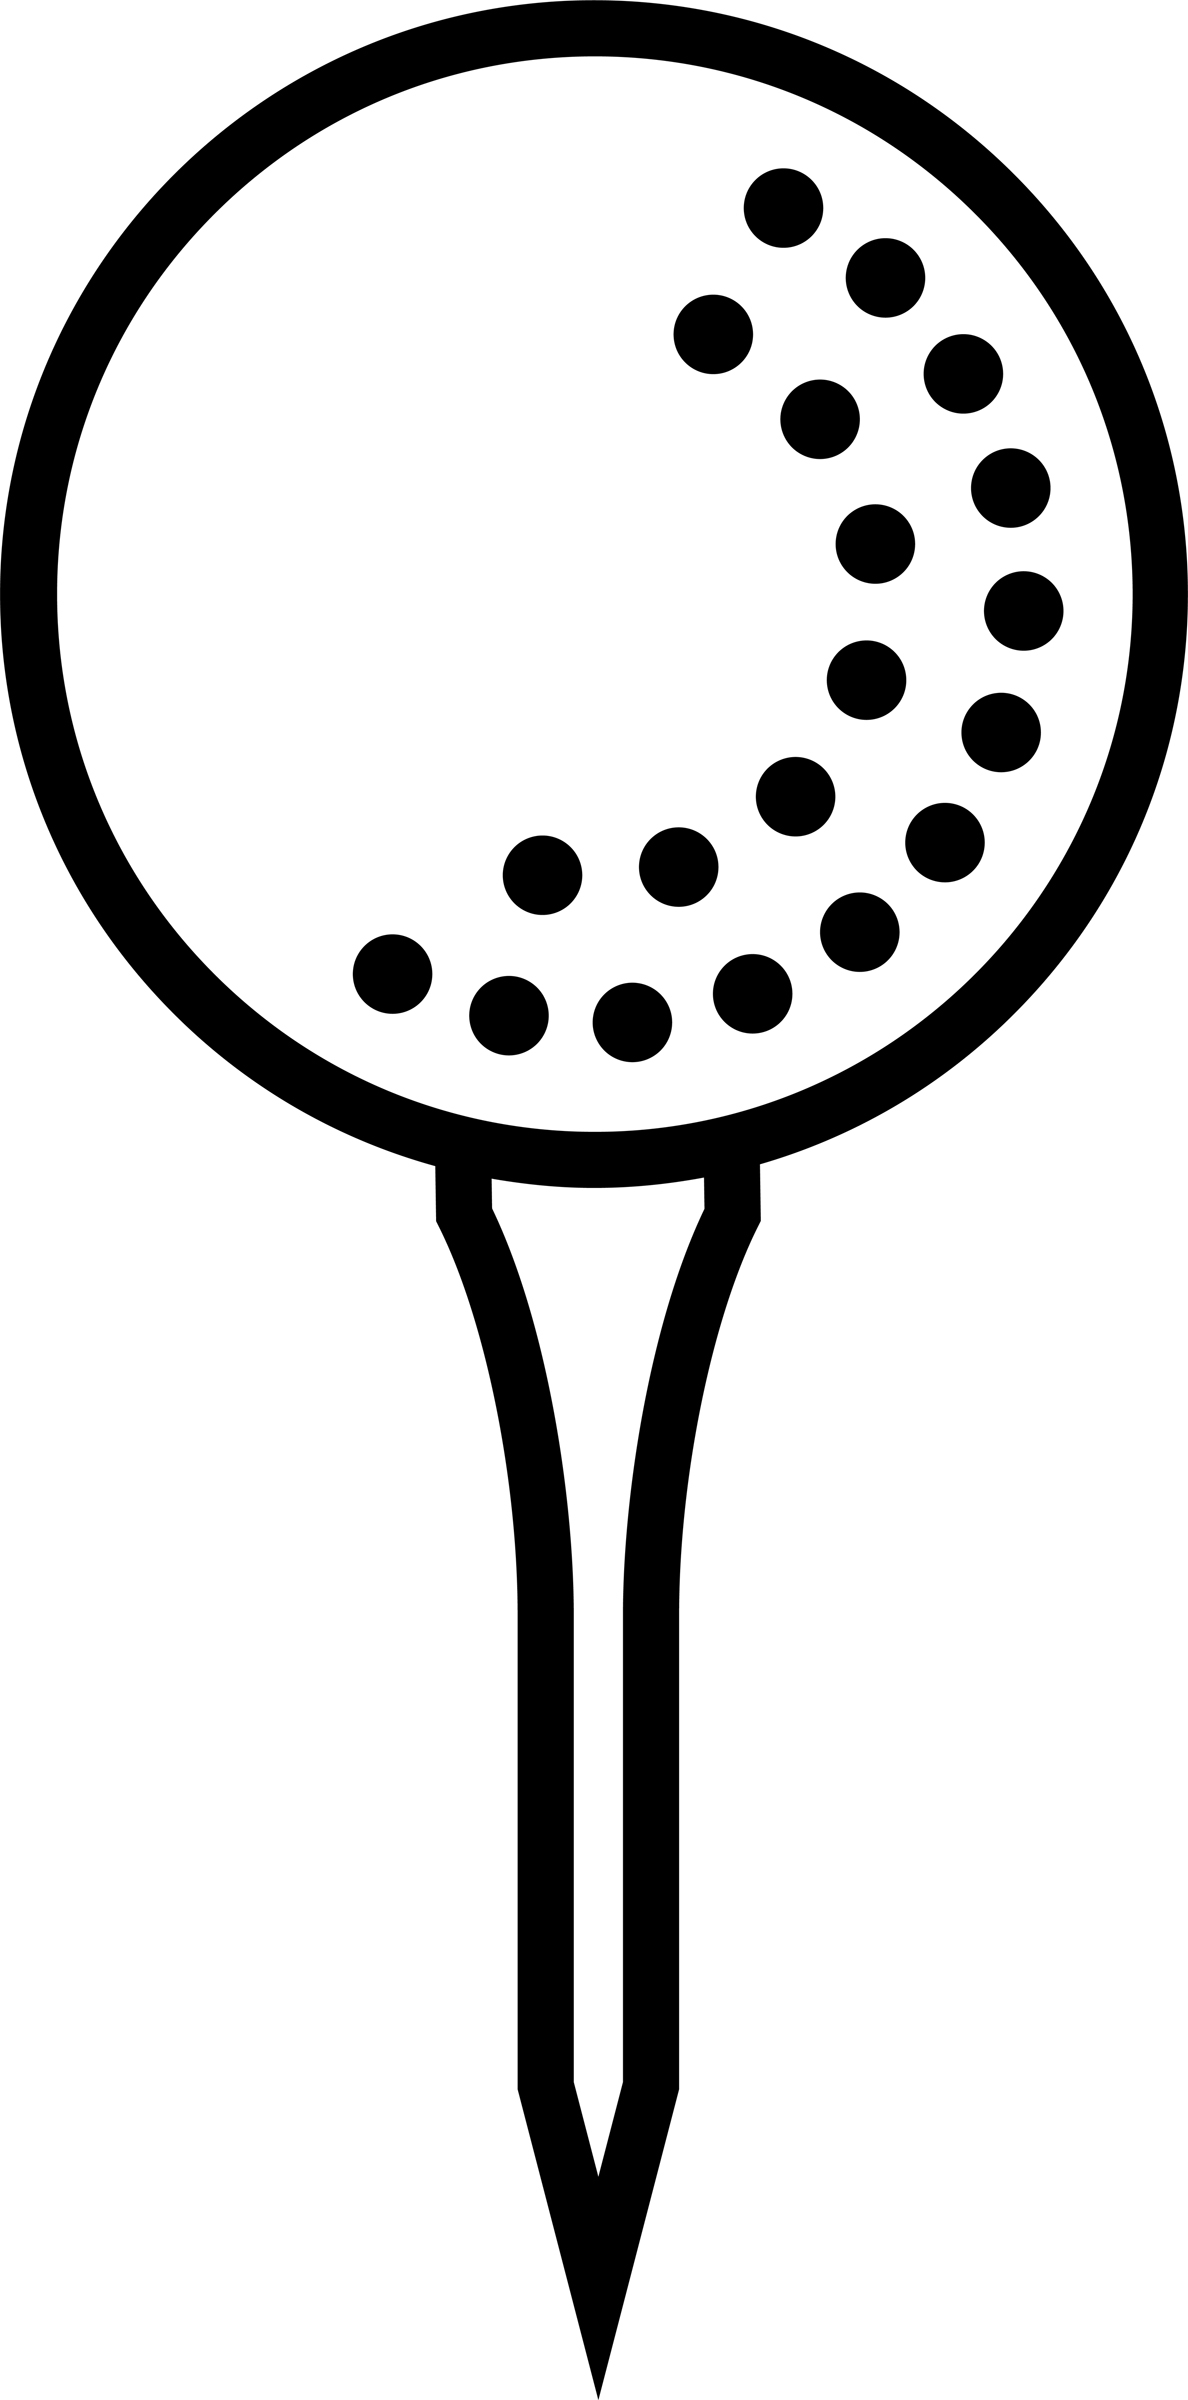 Golfer free golf clipart images graphics animated 2 wikiclipart - Clipartix